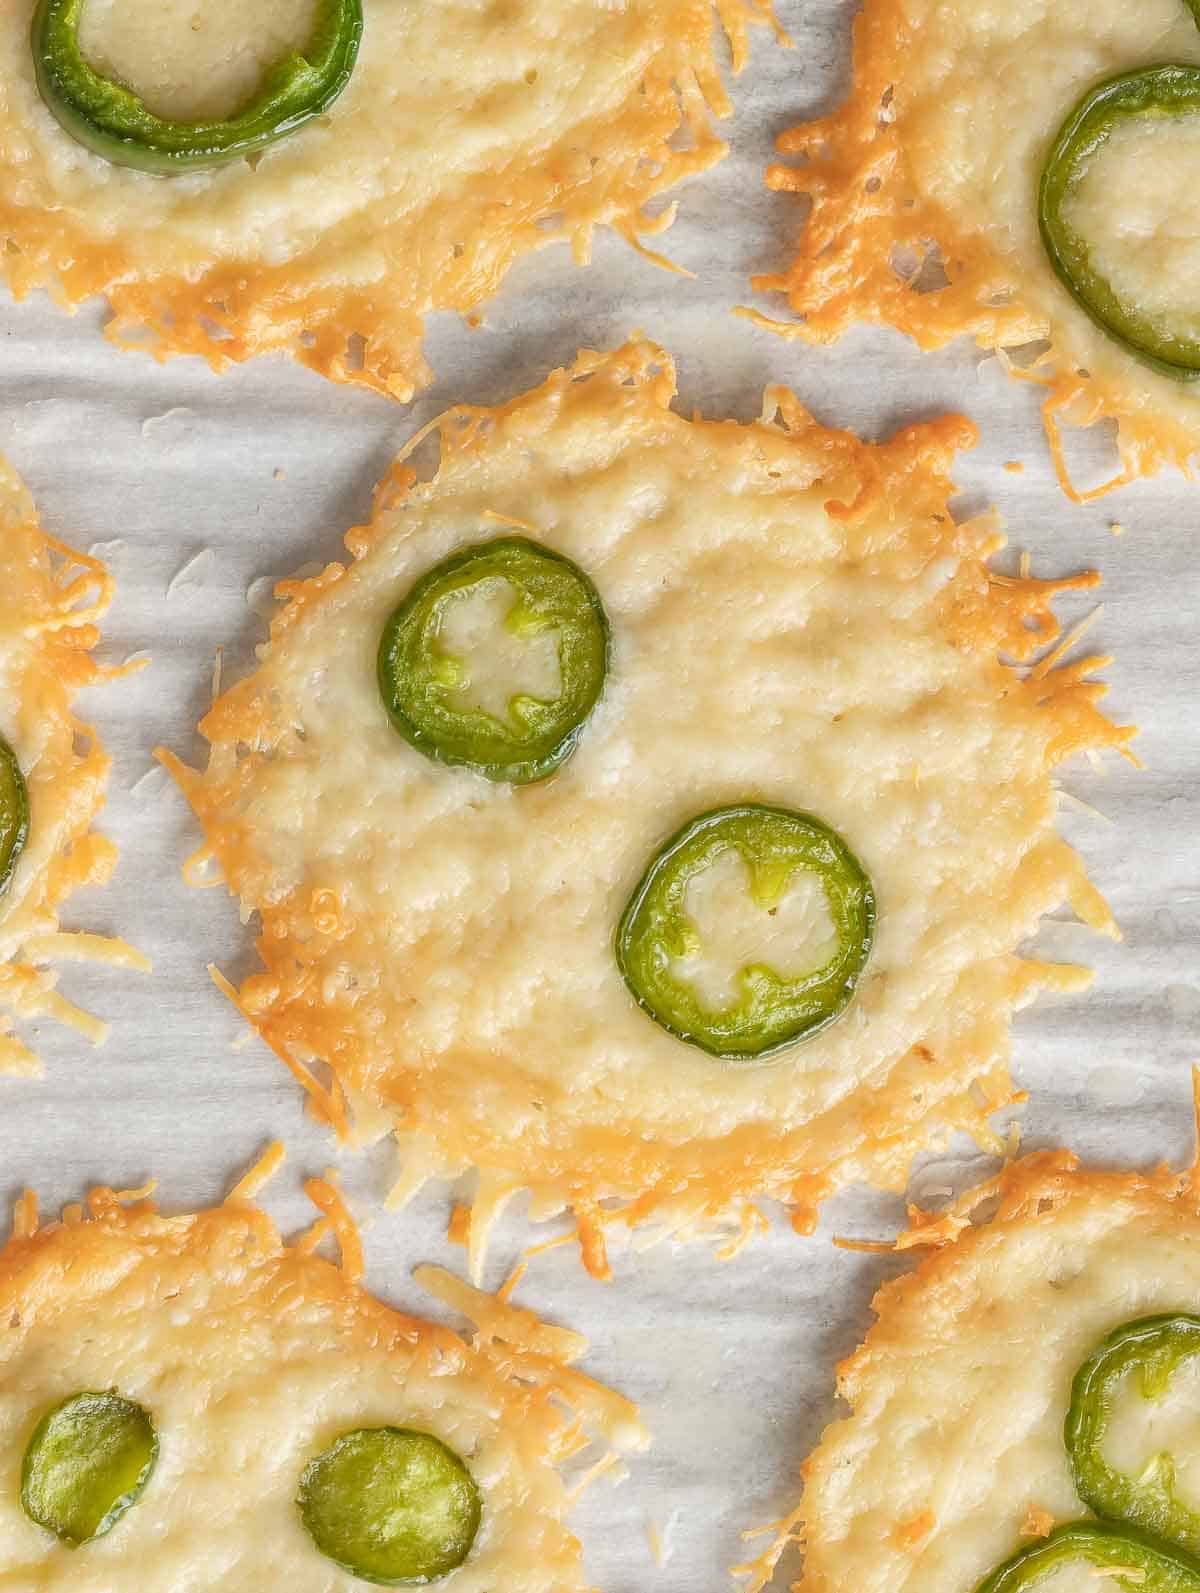 Parmesan chips topped with slices of jalapeno.